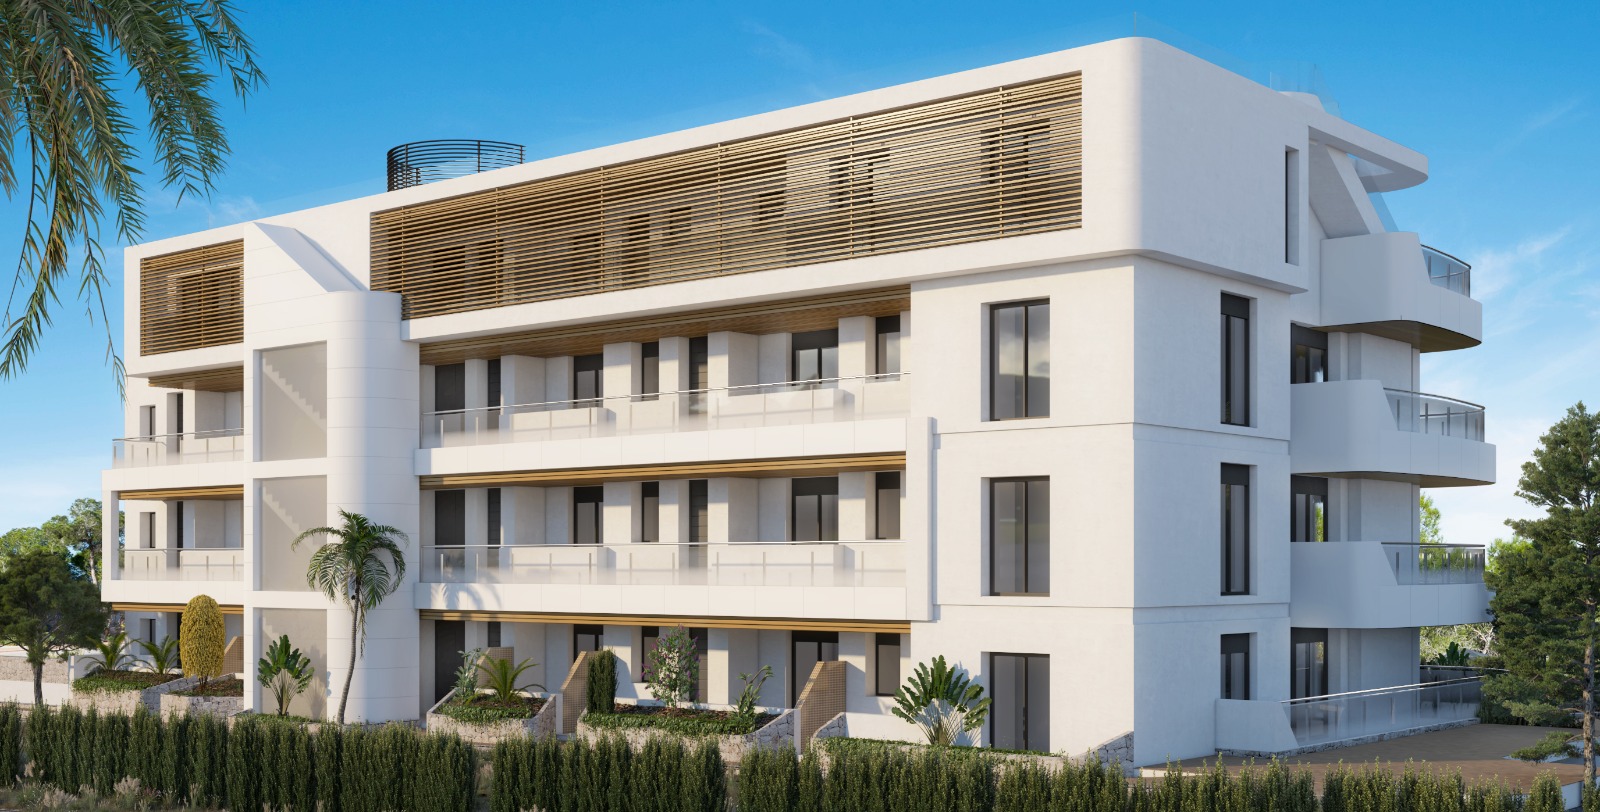 APARTMENTS TO BE BUILT IN PRIME LOCATION ORIHUELA COSTA